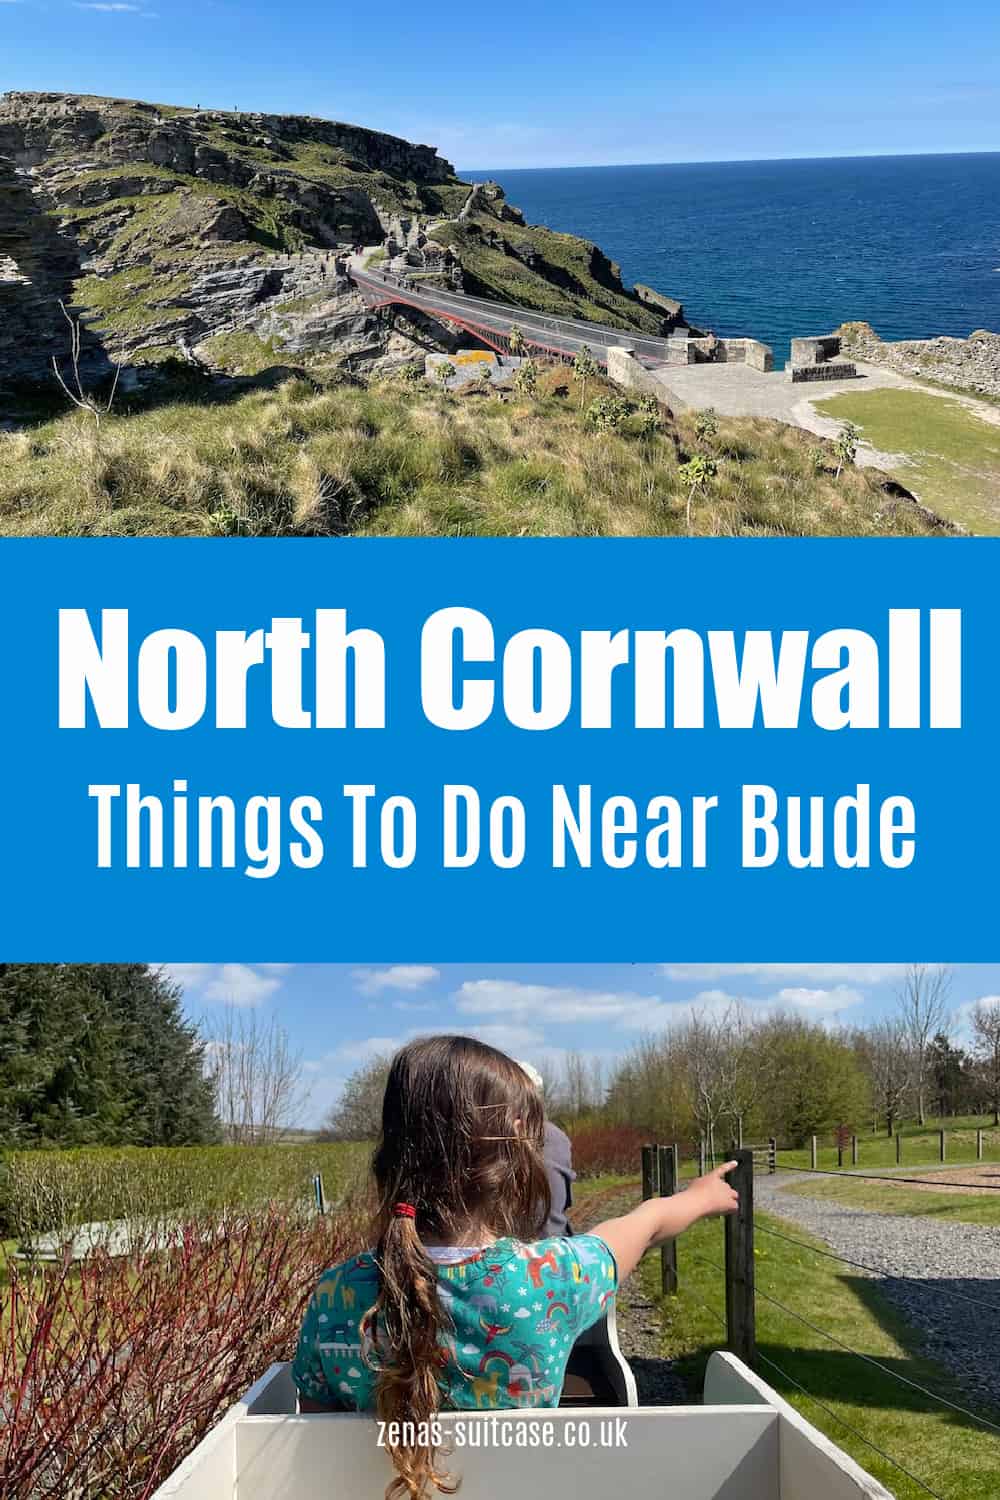 Things to do in Bude - Holiday inspiration for your trip to North Cornwall. Pin now for great places to visit near Bude